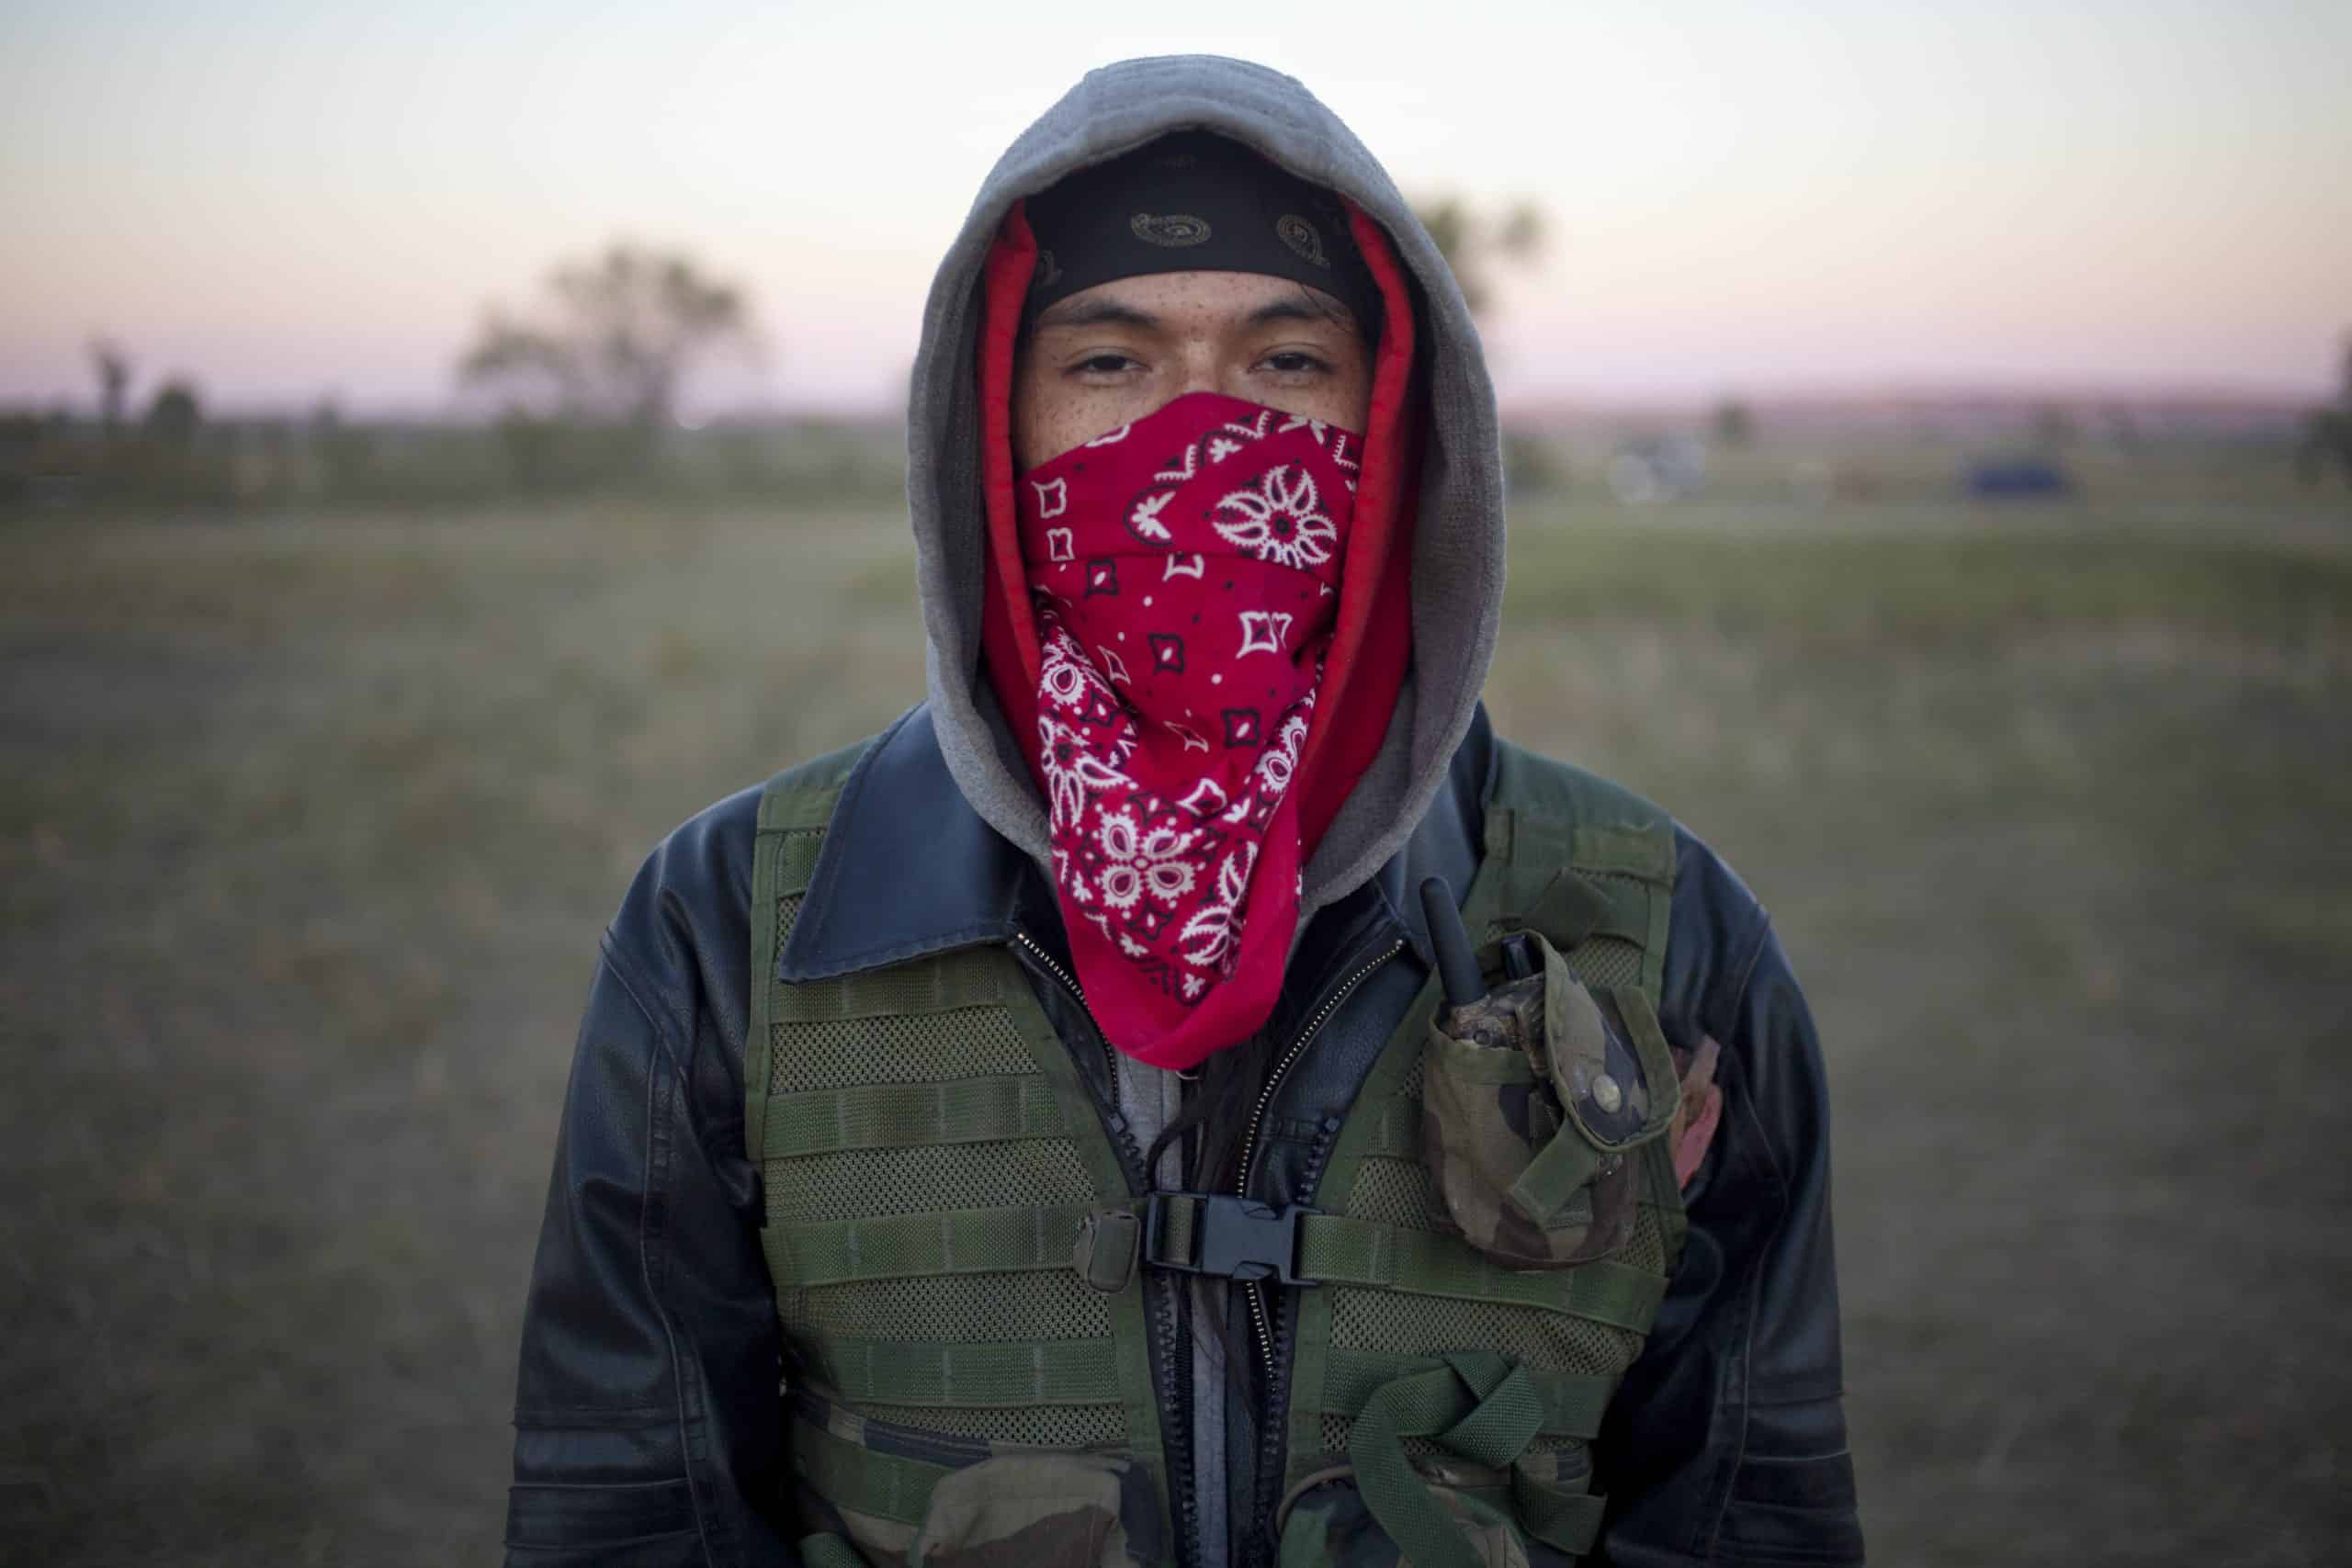 Photos of Dakota Access Pipeline Protest by Standing Rock Sioux Nation